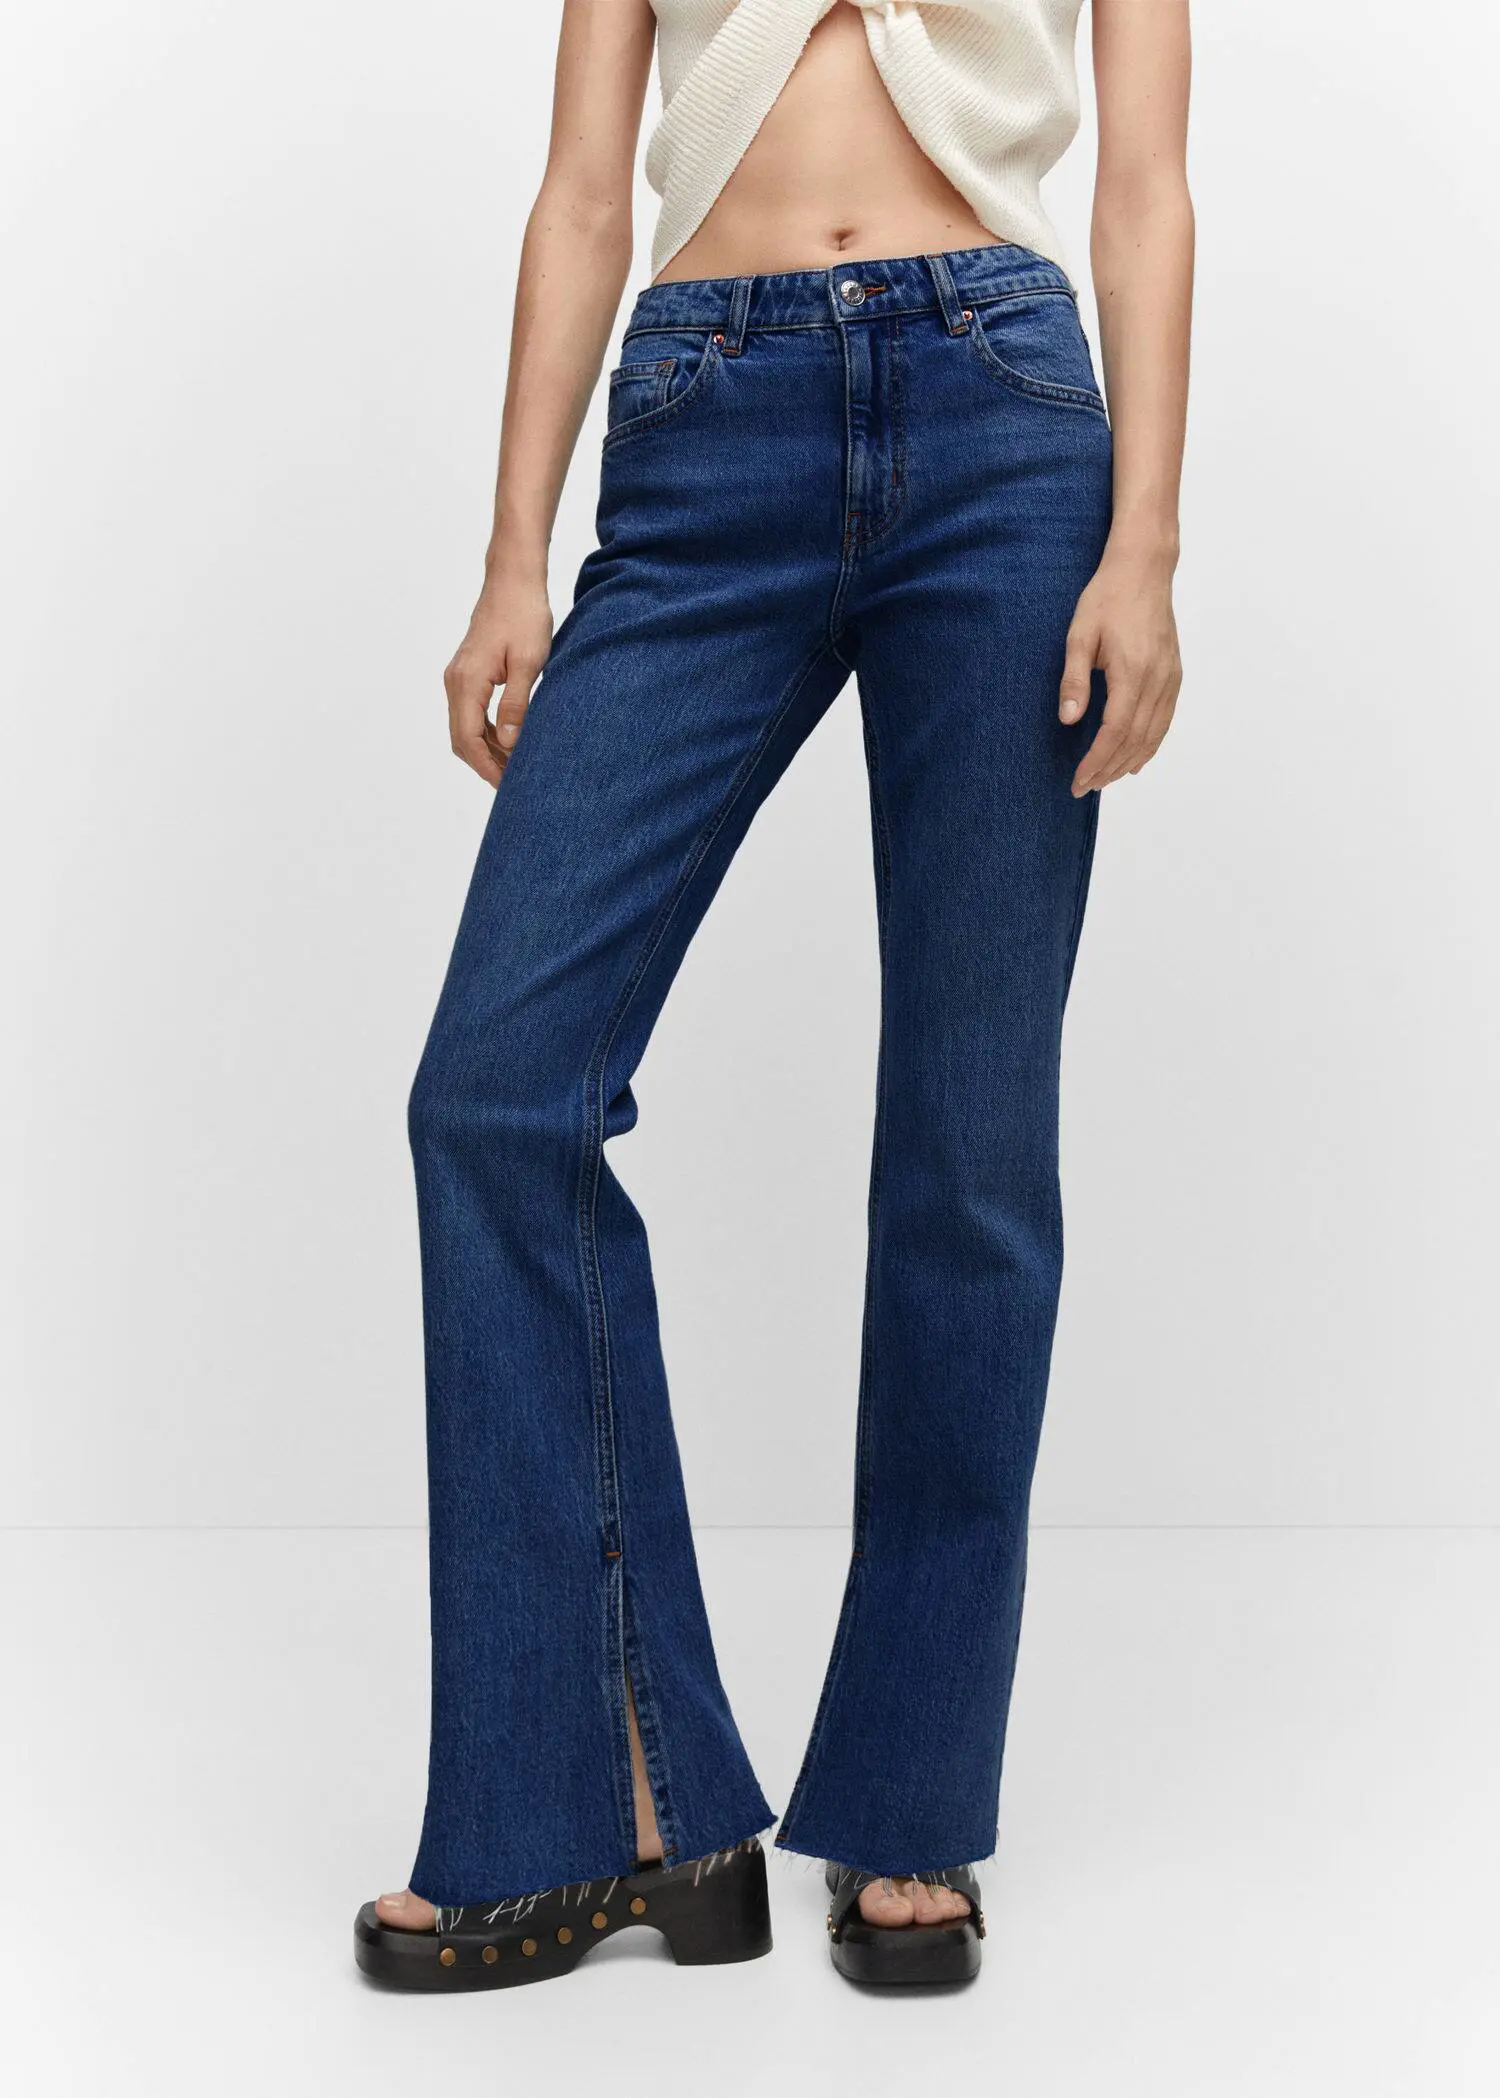 Mango Jean flare taille normale fentes. 2